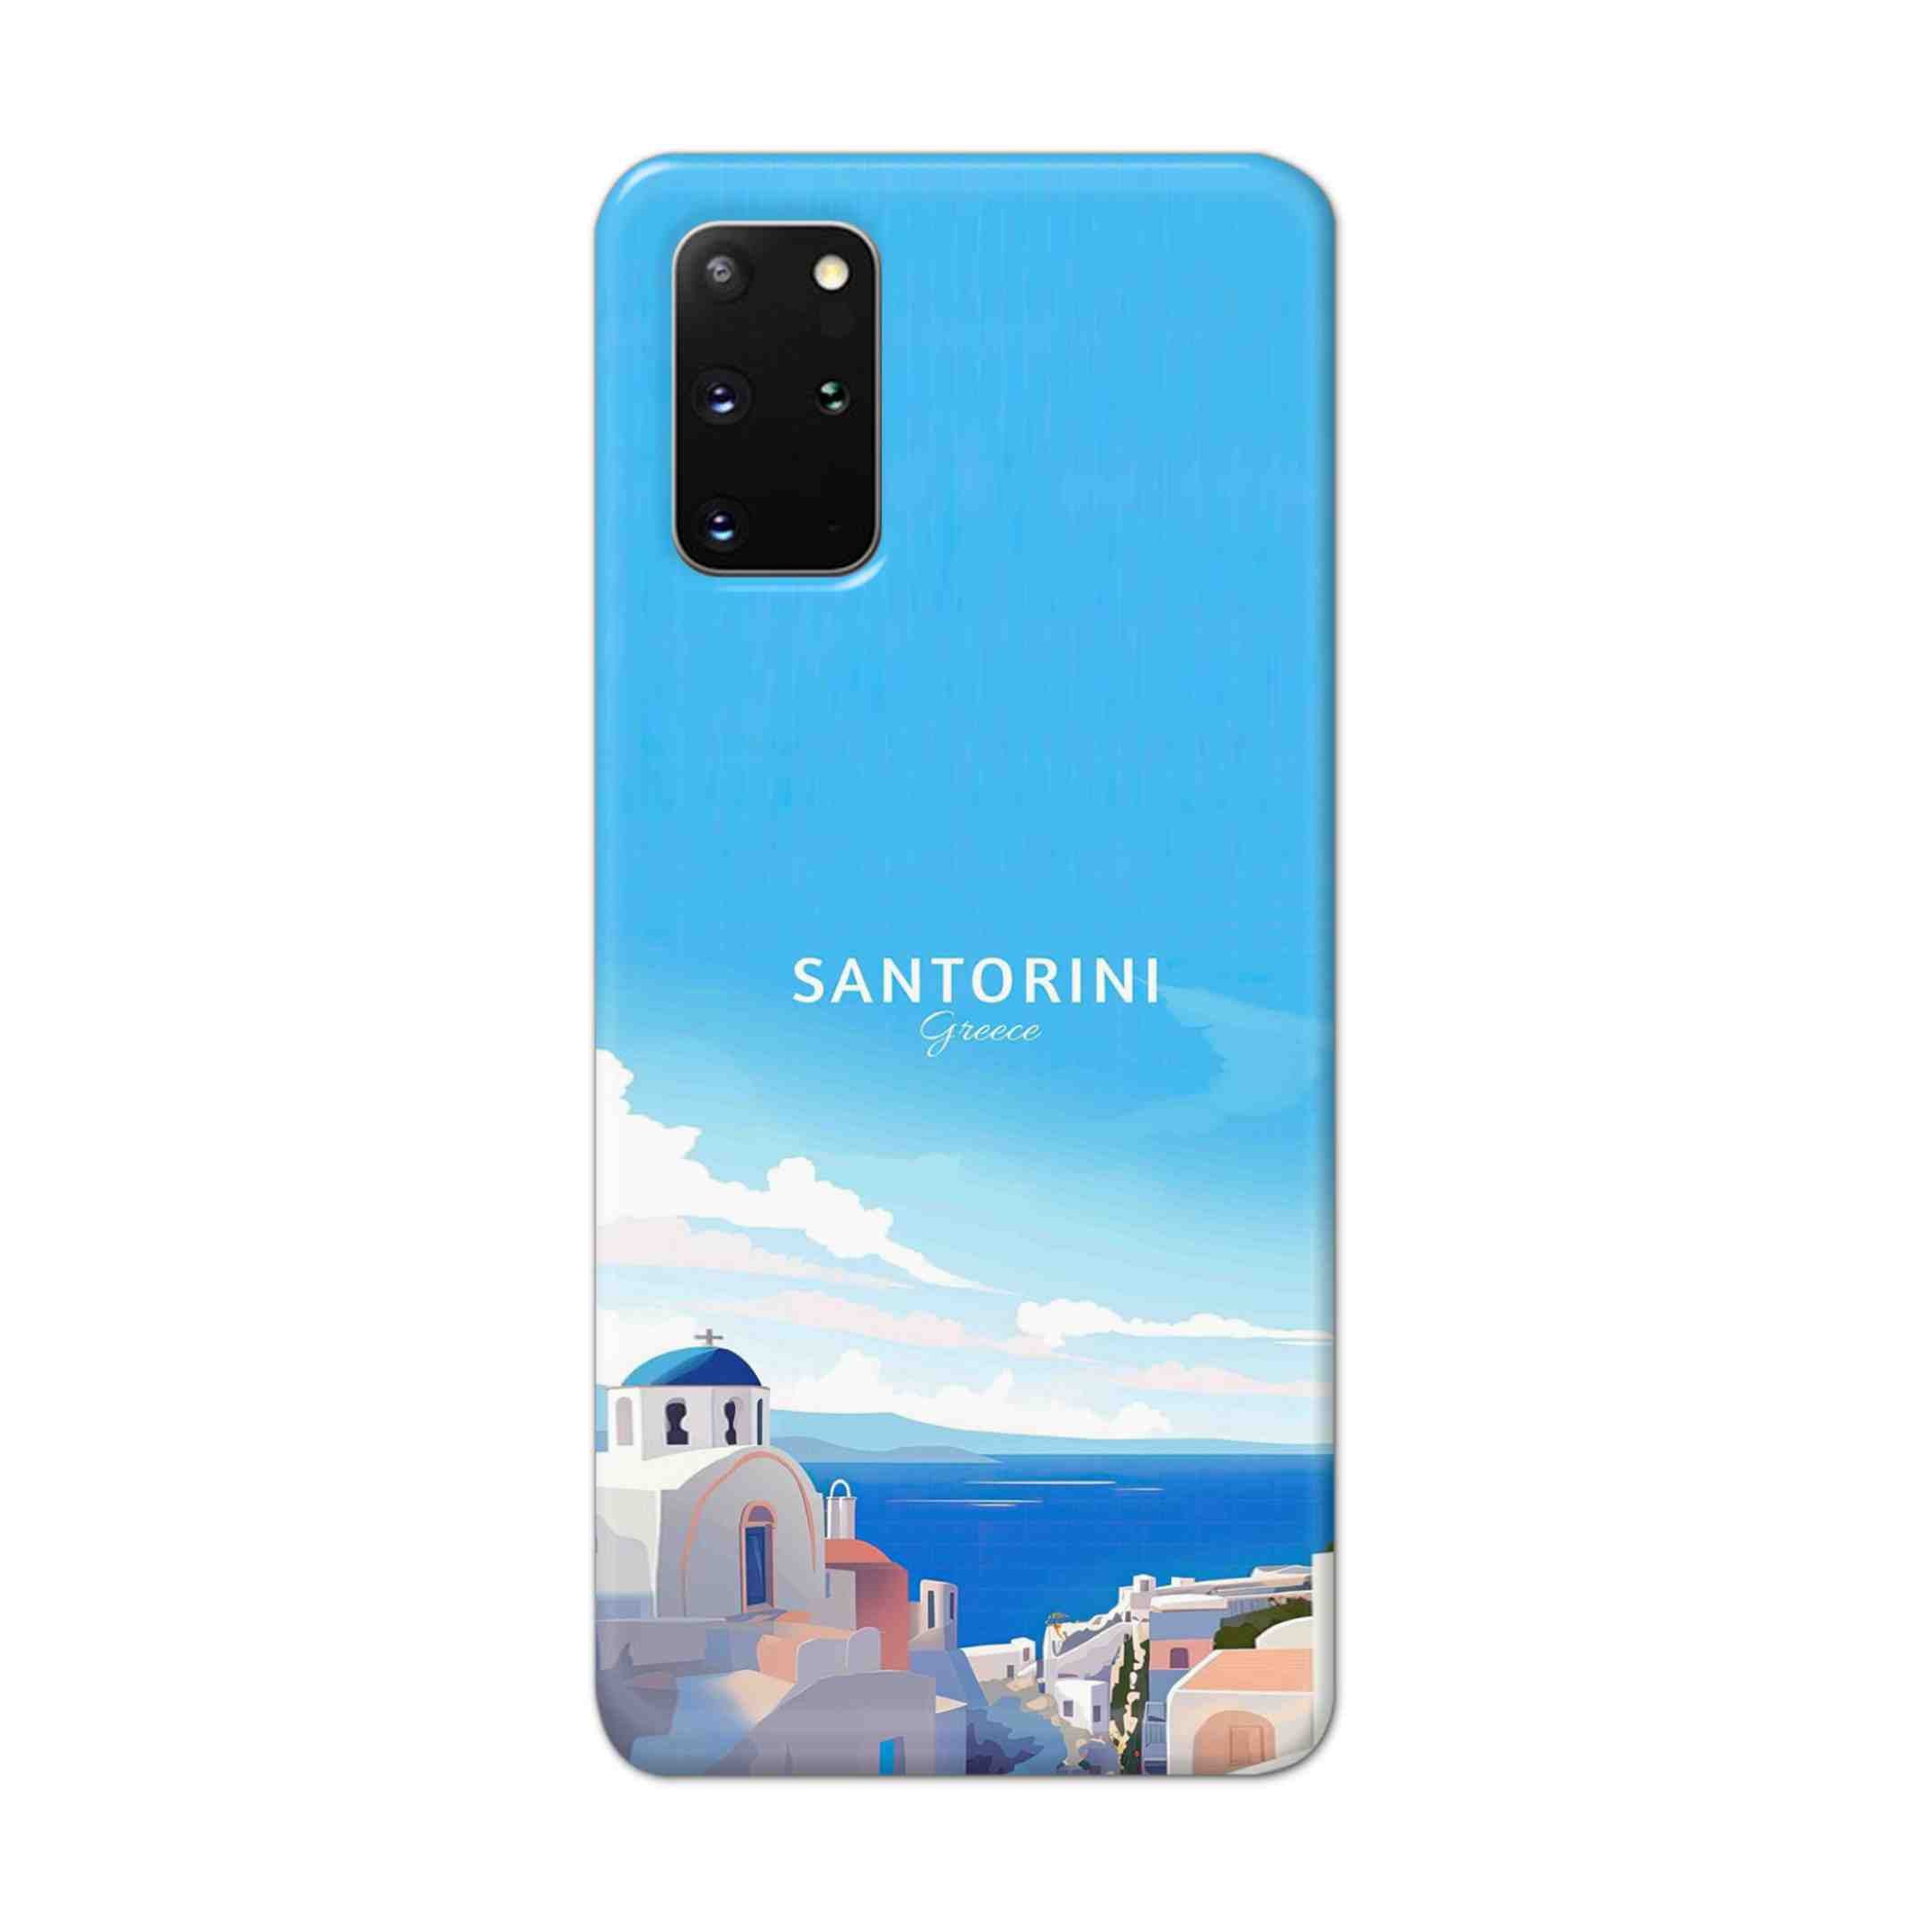 Buy Santorini Hard Back Mobile Phone Case Cover For Samsung Galaxy S20 Plus Online